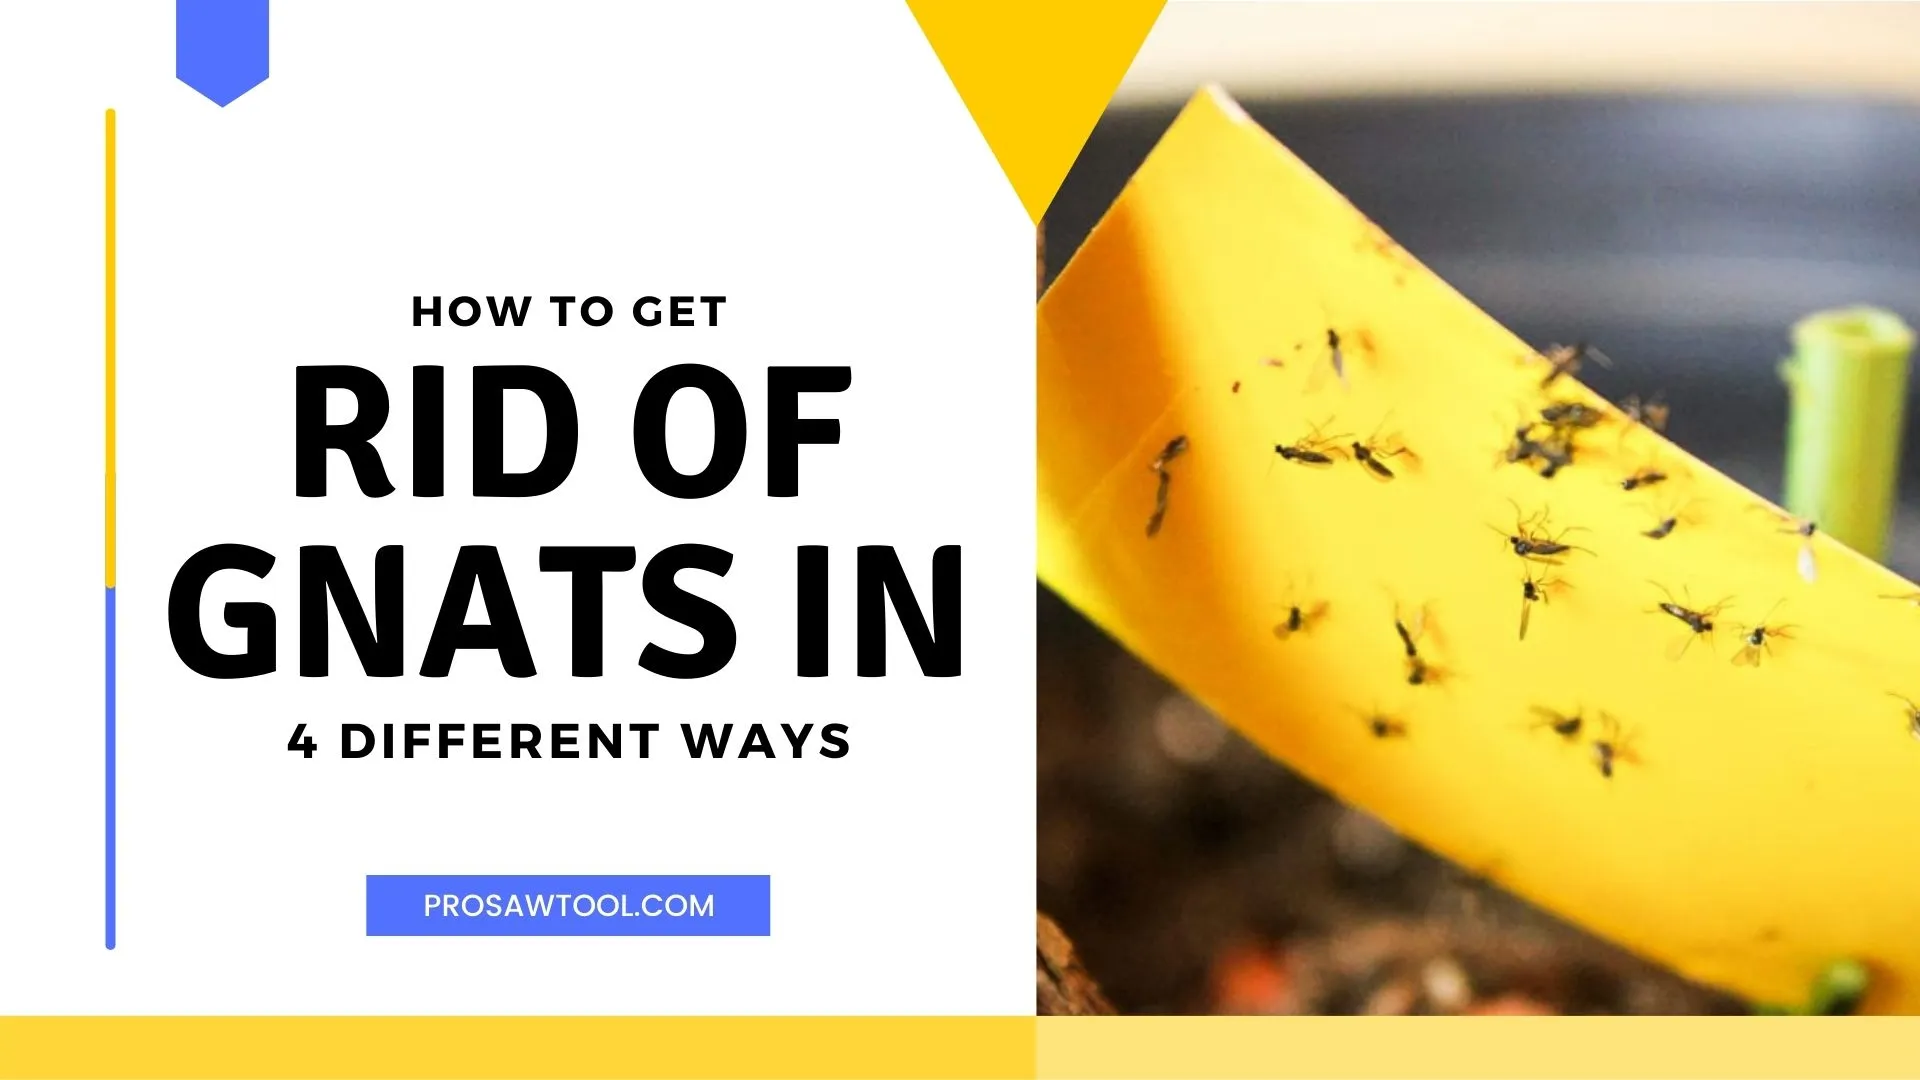 How to Get Rid of Gnats in 4 Different Ways